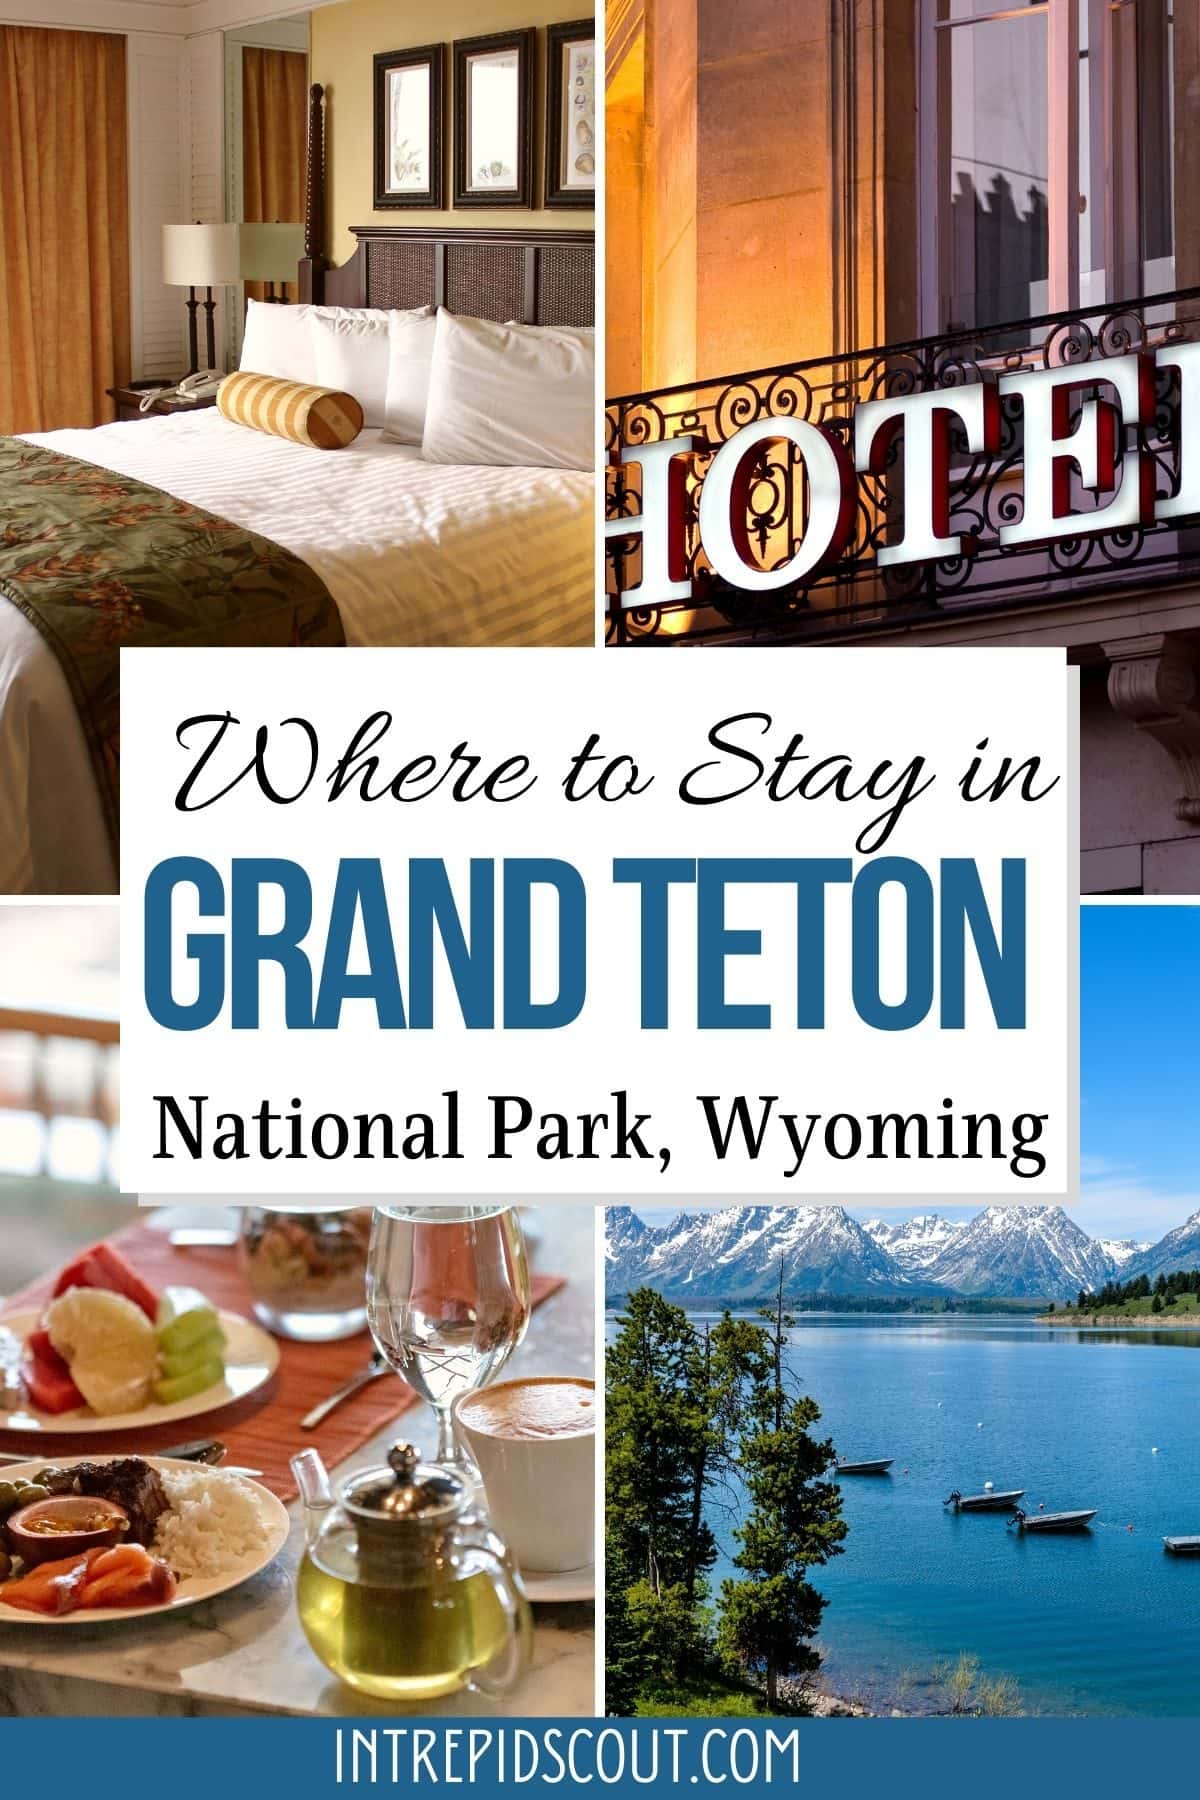 Where to Stay in Grand Teton